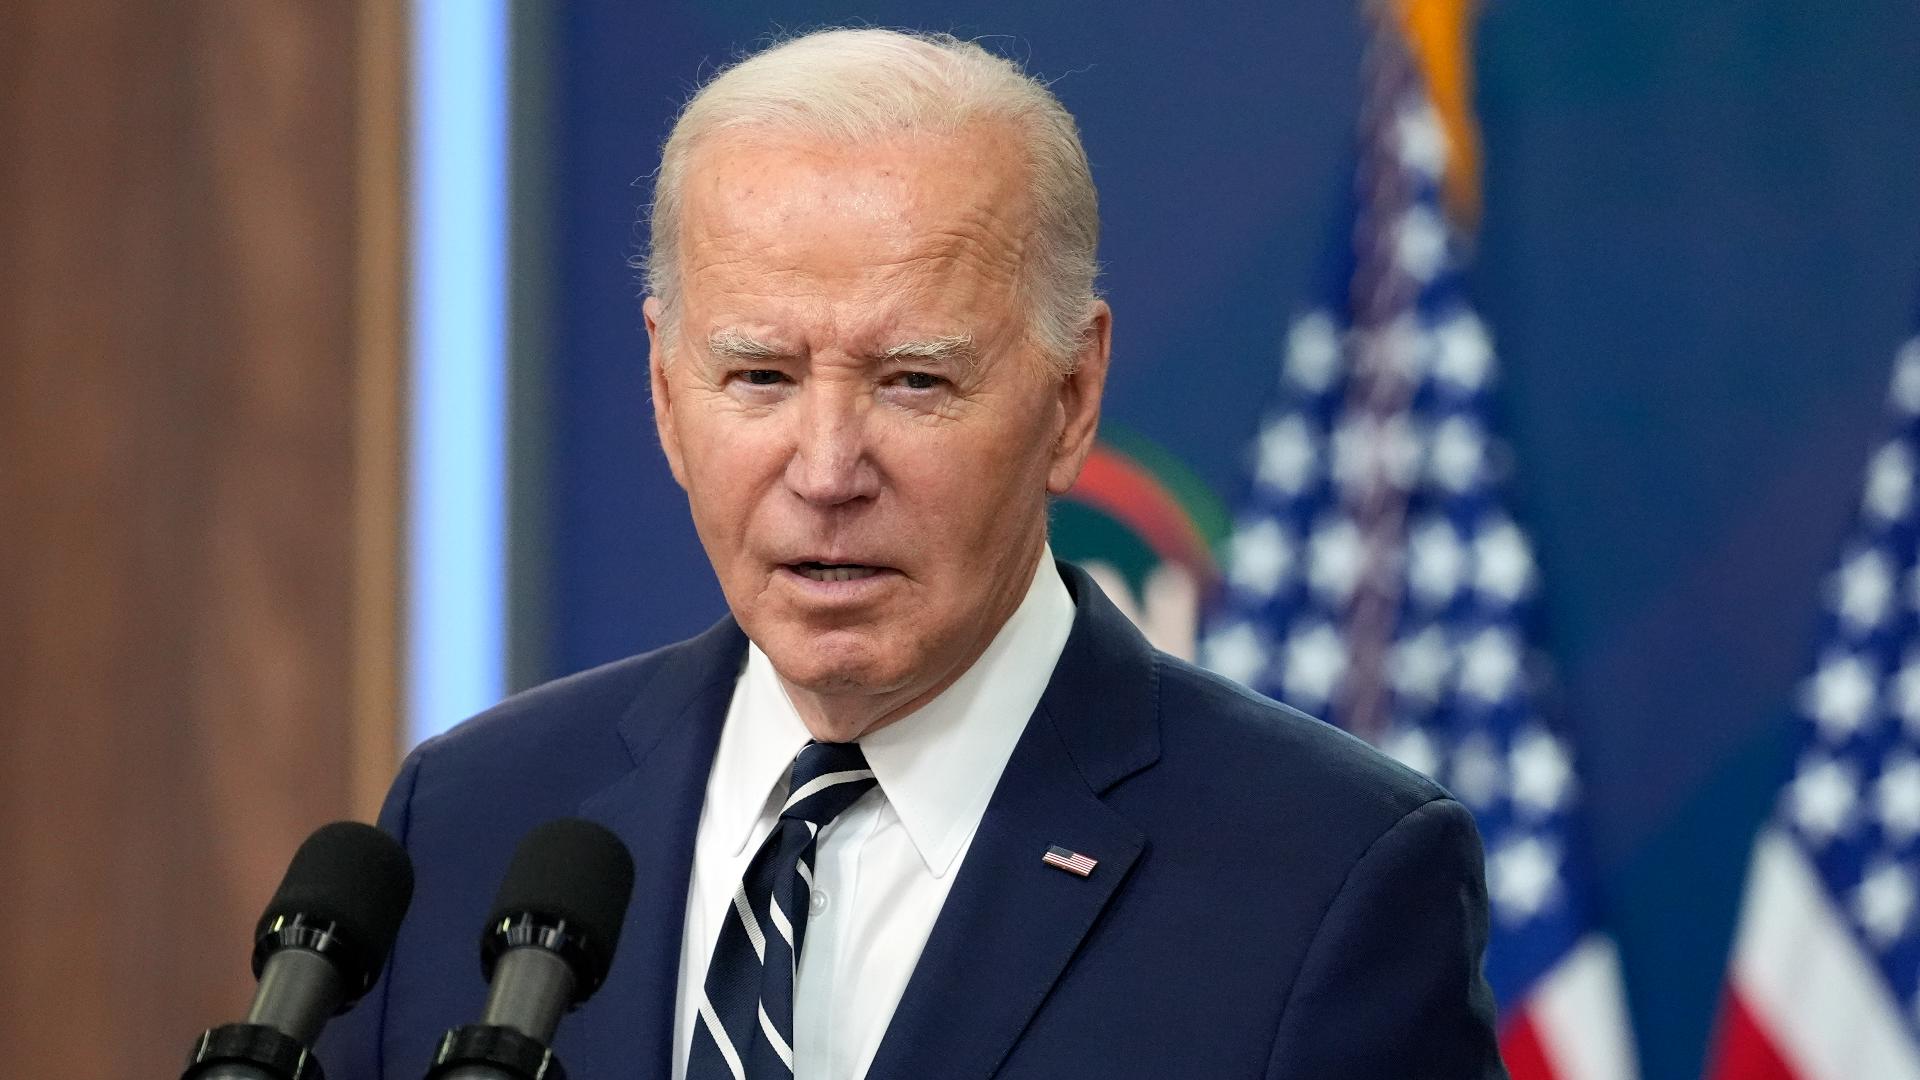 Ohio Democrats now only have two options to get Biden on the ballot in November.